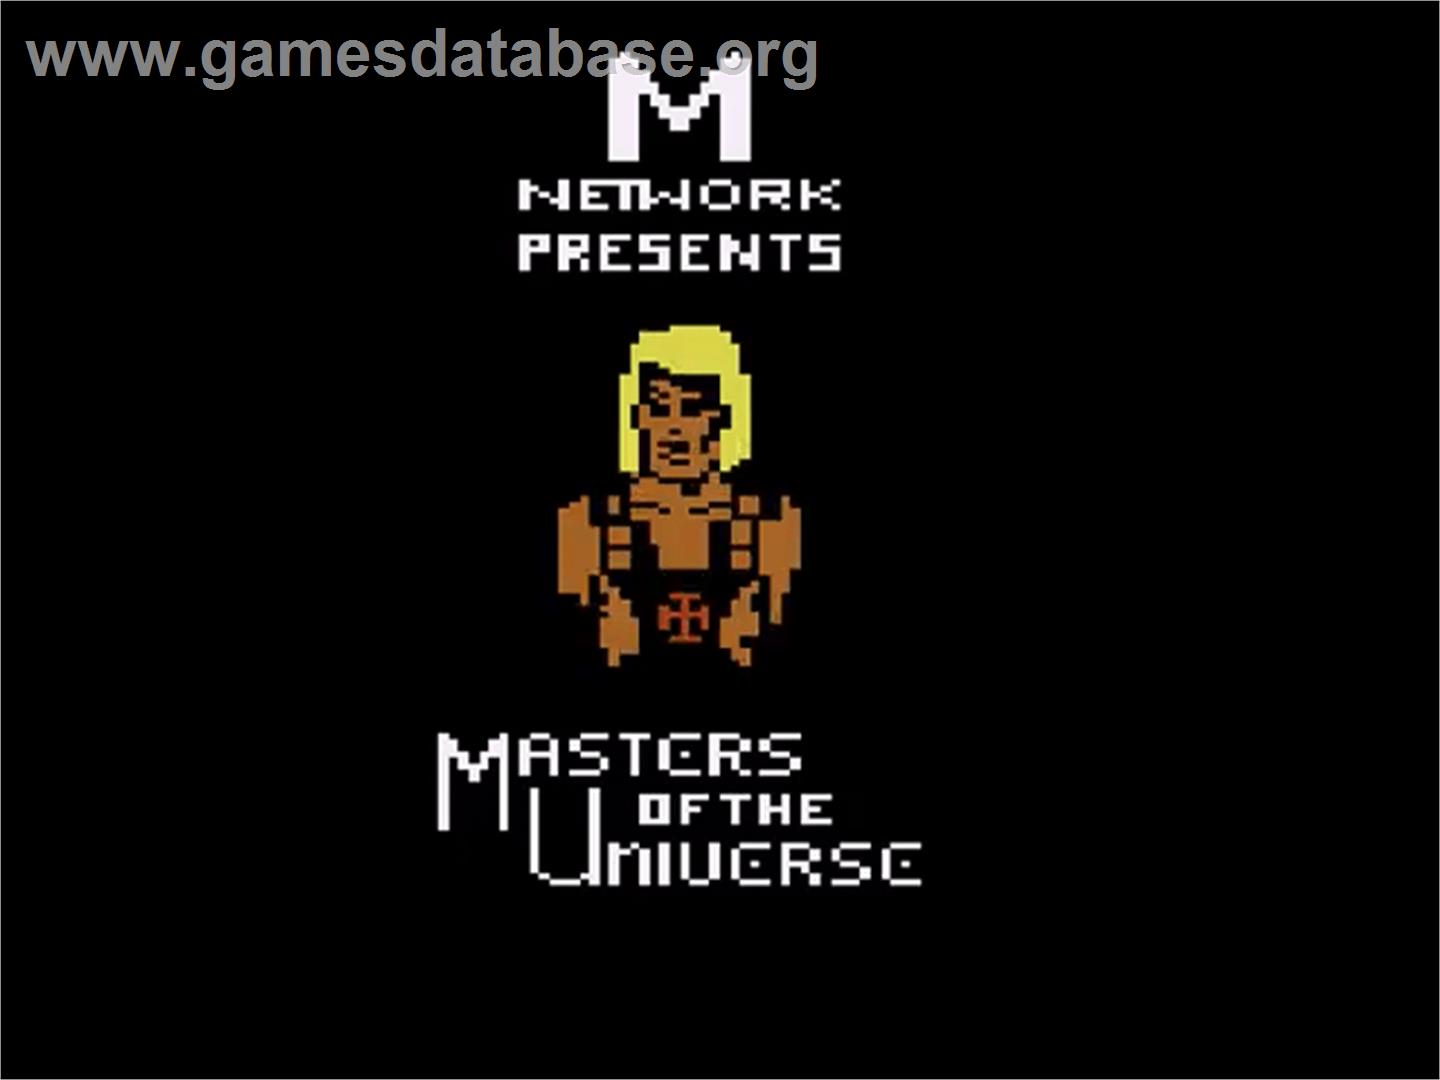 Masters of the Universe: The Power of He-Man - Atari 2600 - Artwork - Title Screen